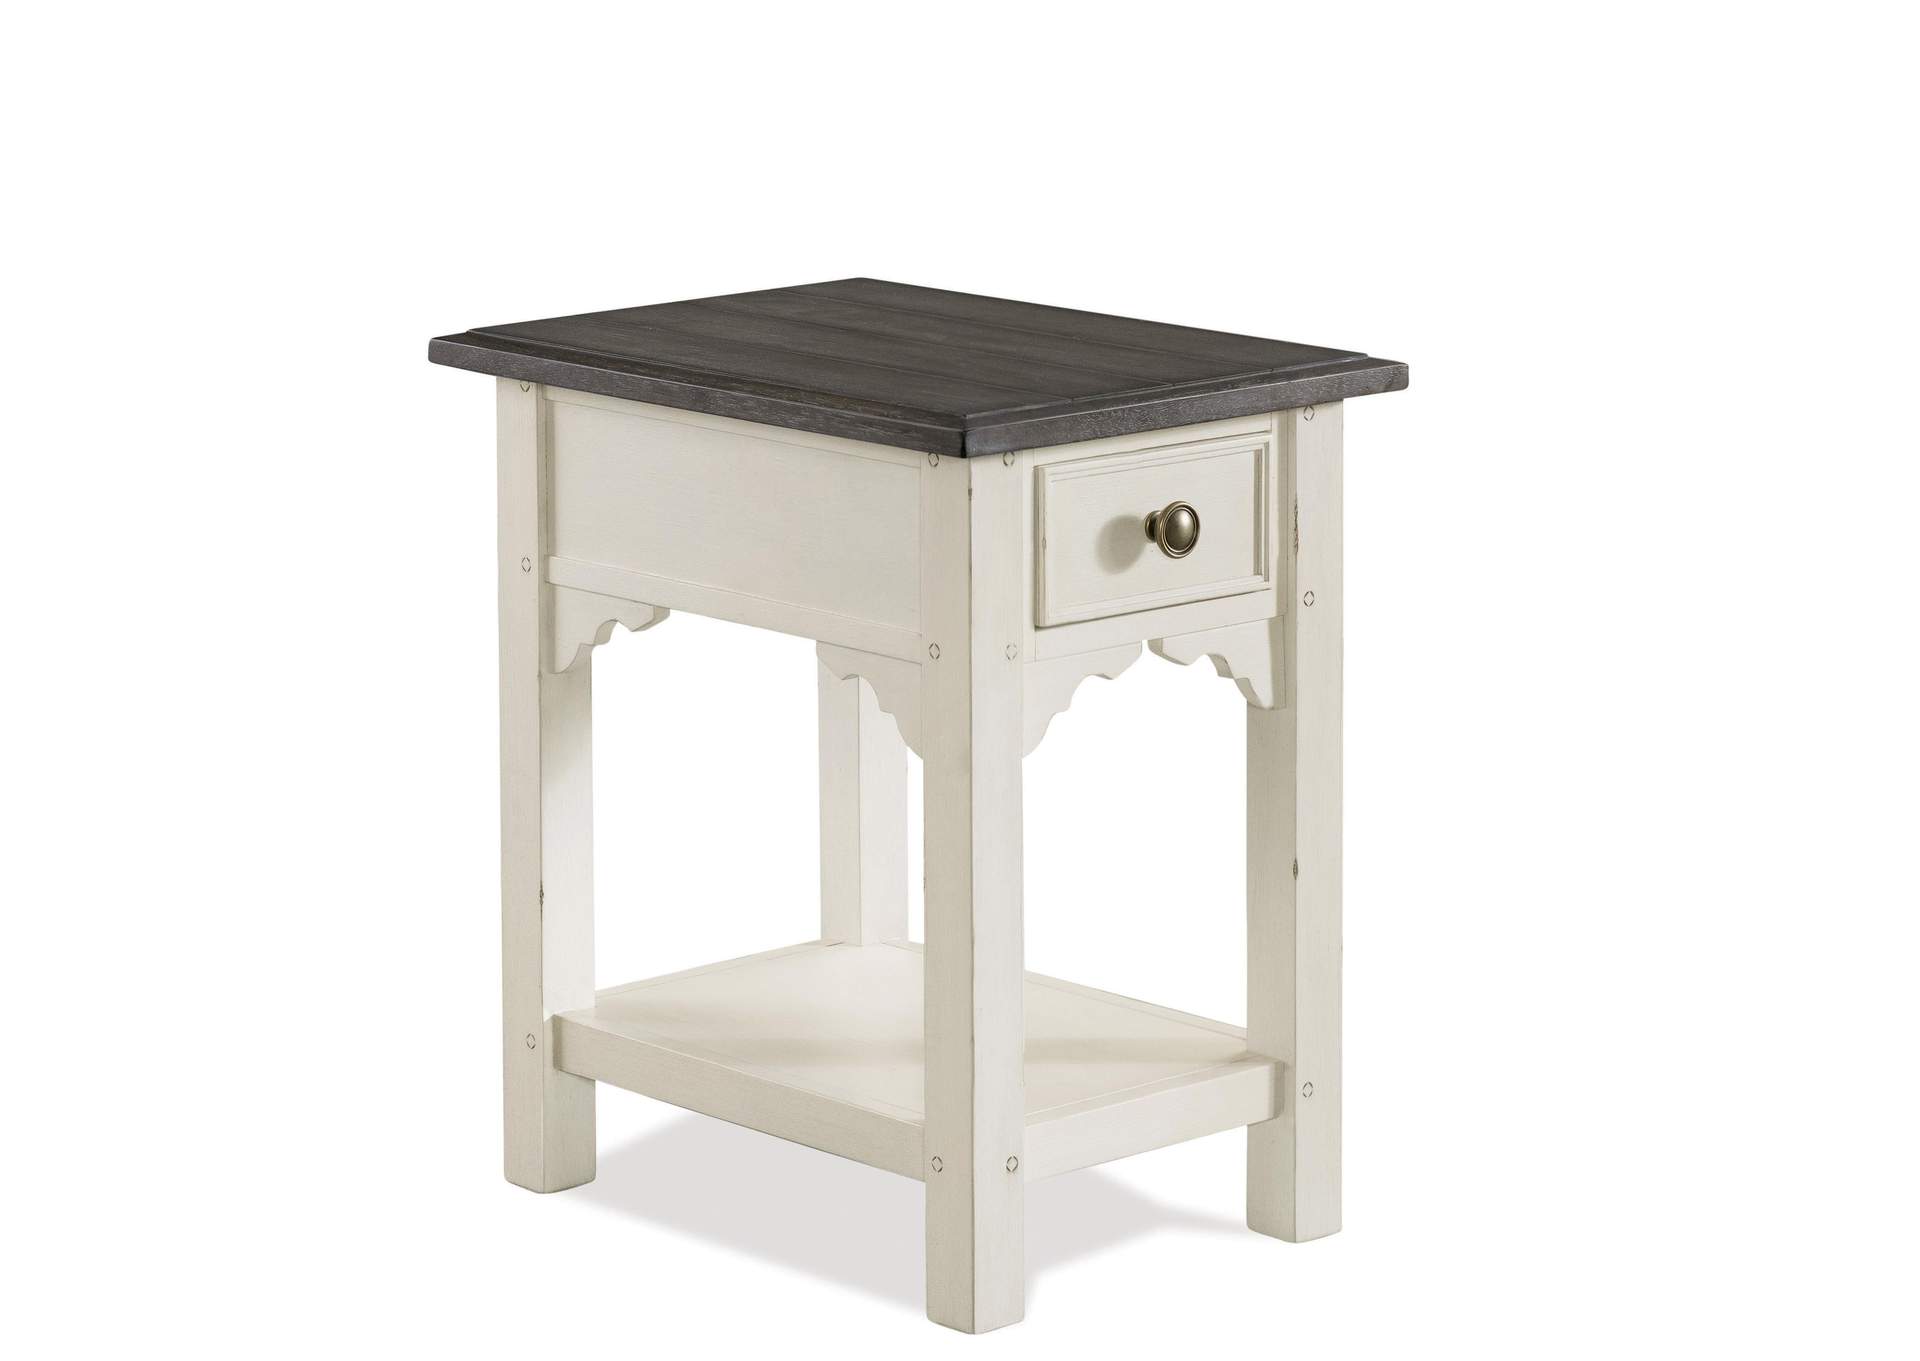 Grand Haven Chairside Table,Riverside